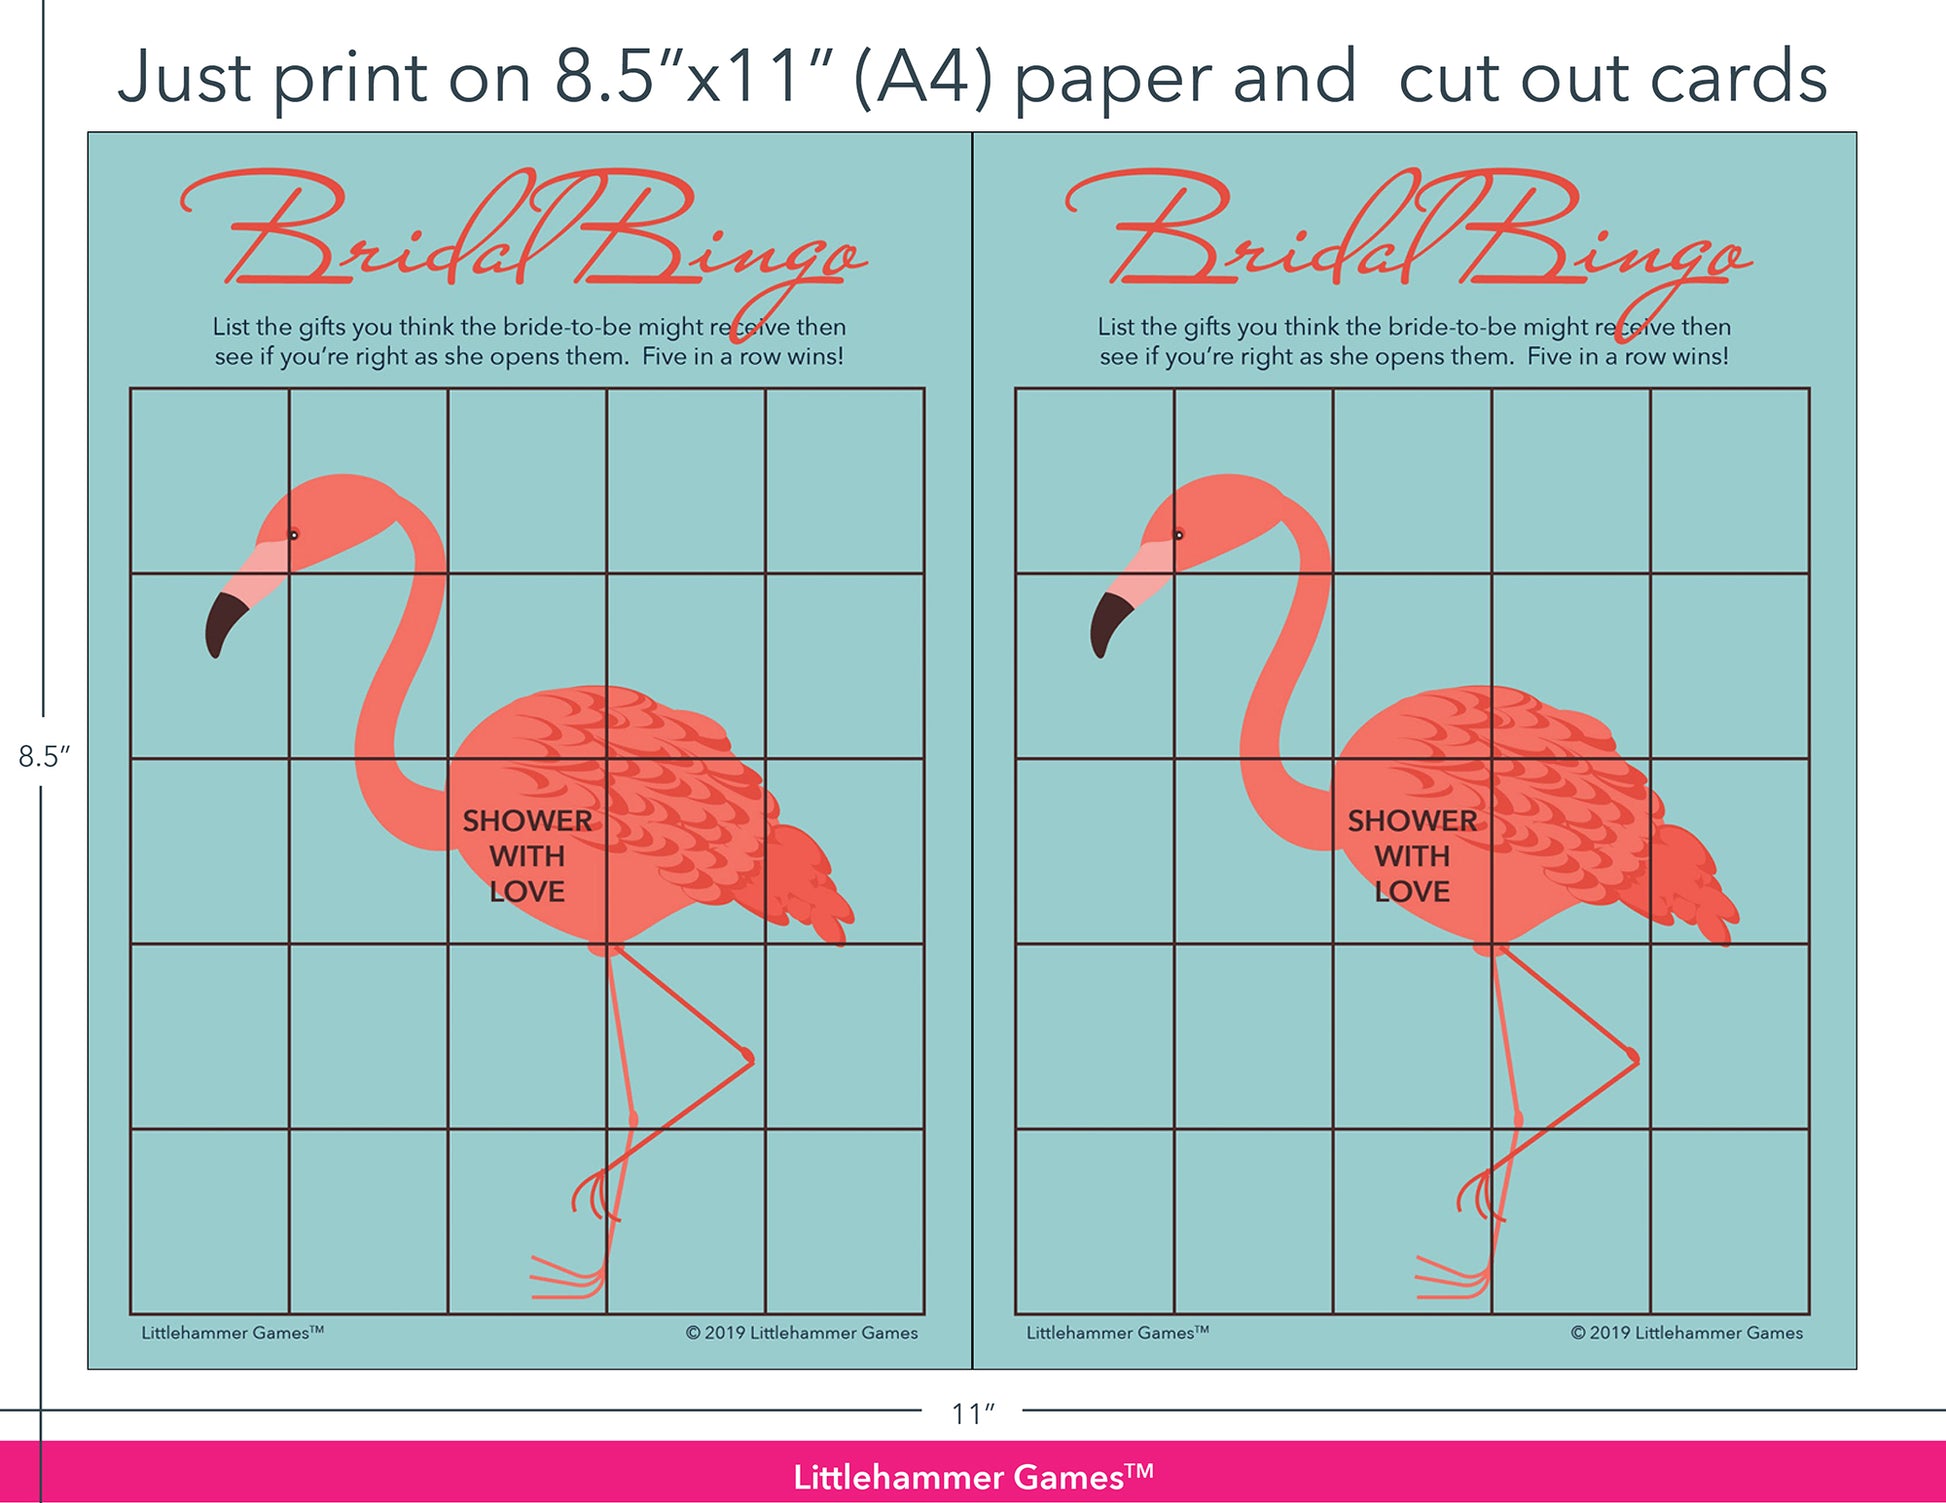 Flamingo-themed Bridal Gift Bingo game cards with printing instructions